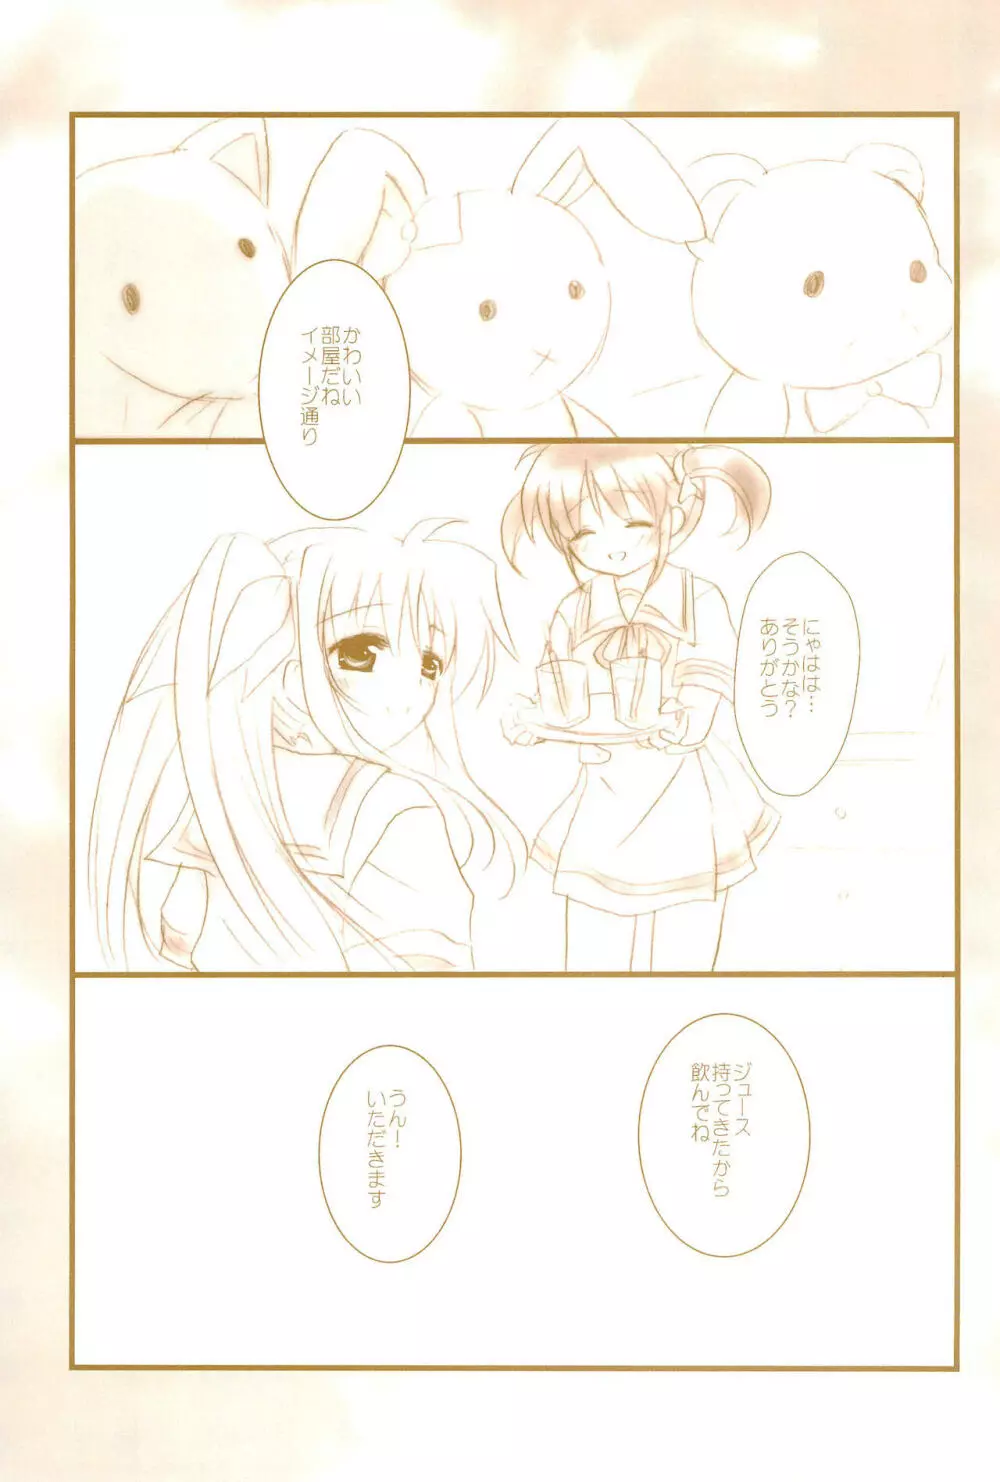 Love Life ～なのフェイなの再録集 3～ - page77